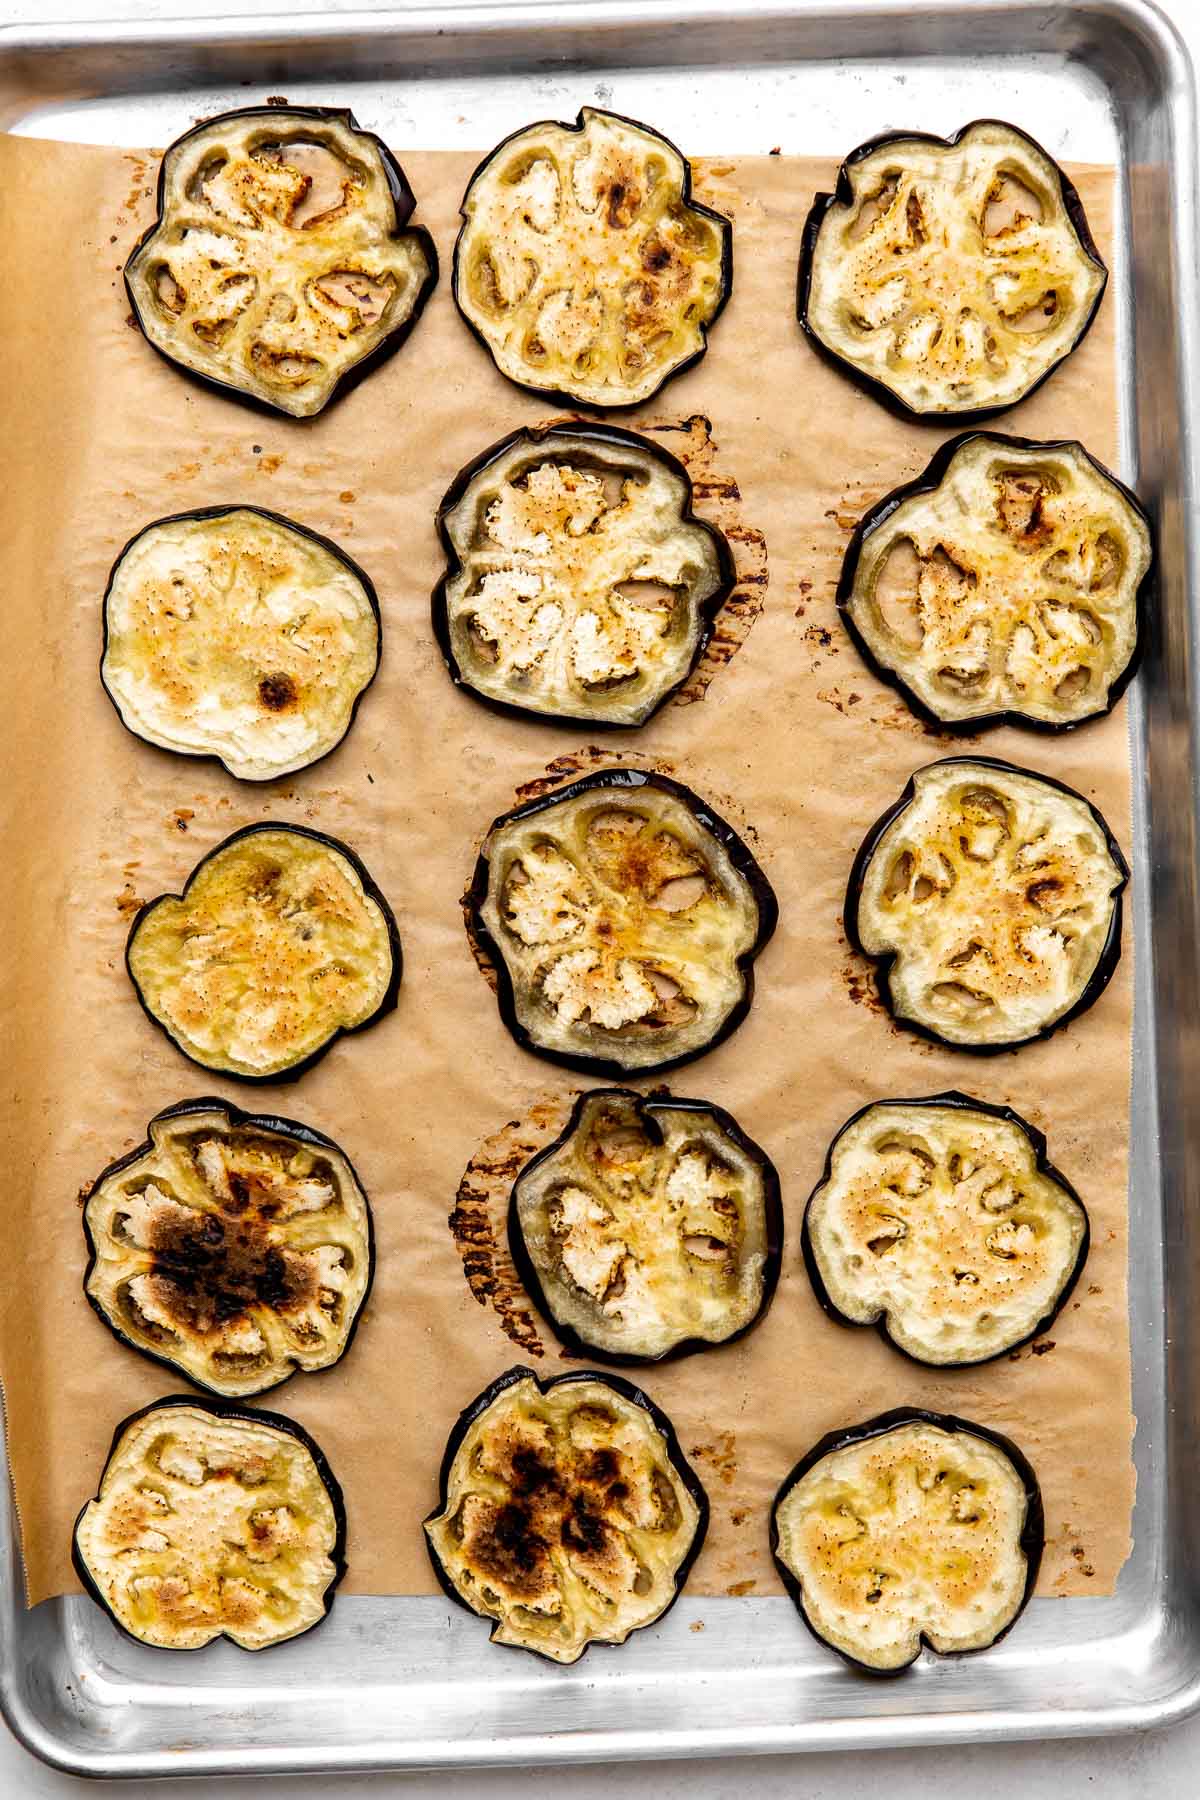 Sliced roasted eggplant rounds arranged on a parchment lined baking sheet. The baking sheet sits atop a creamy white textured surface.